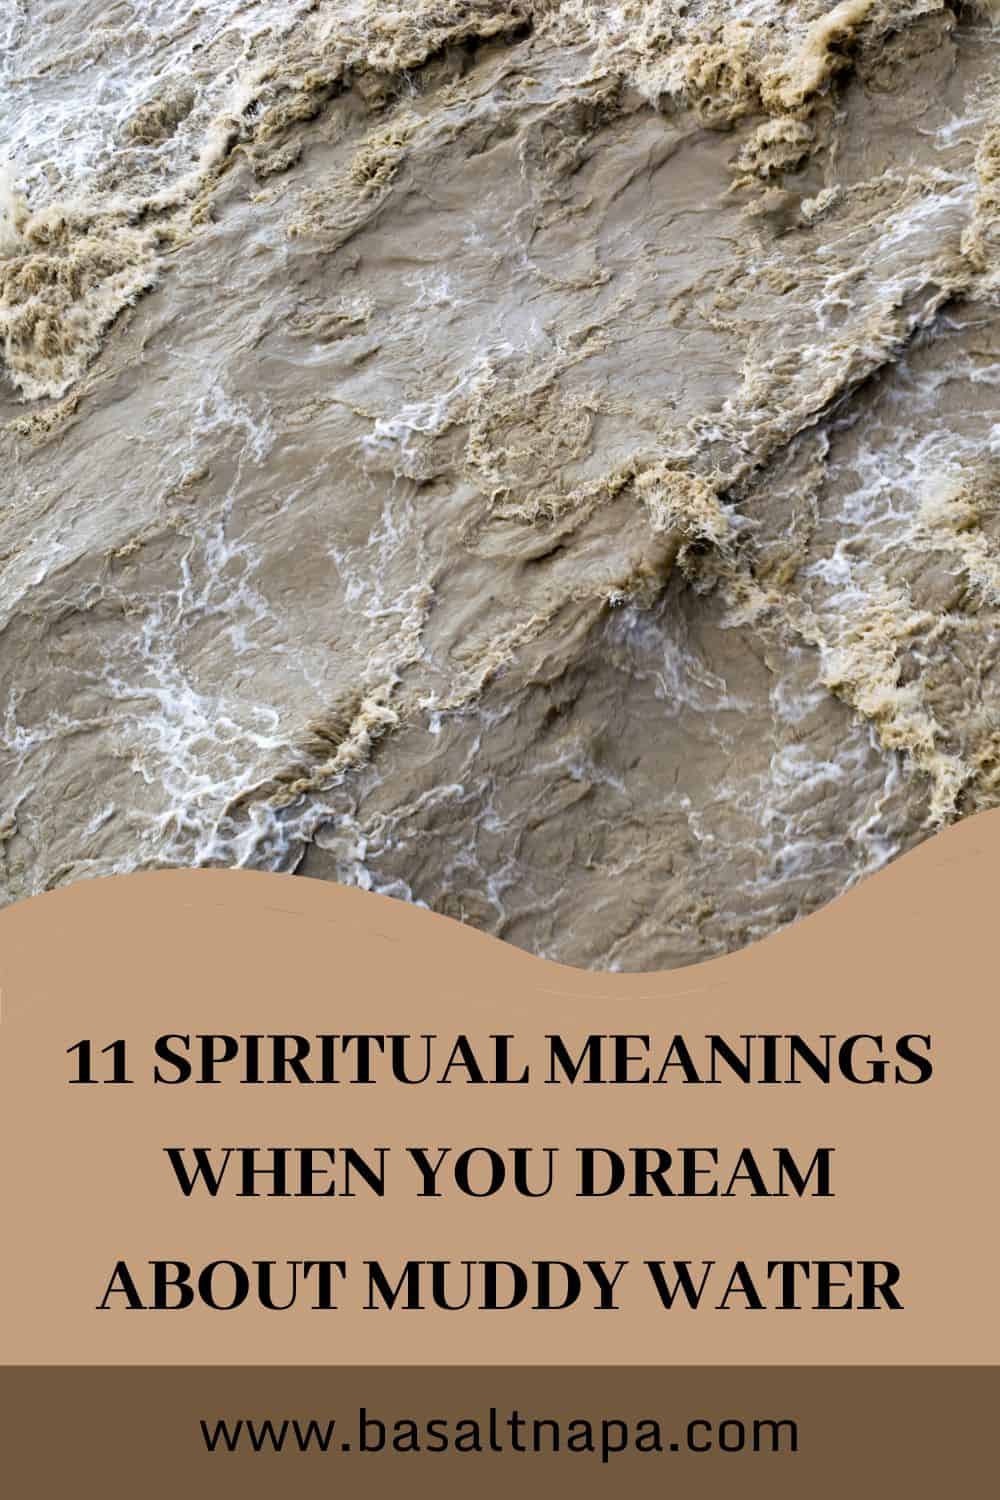 Dream of Dirty Water – General Meaning